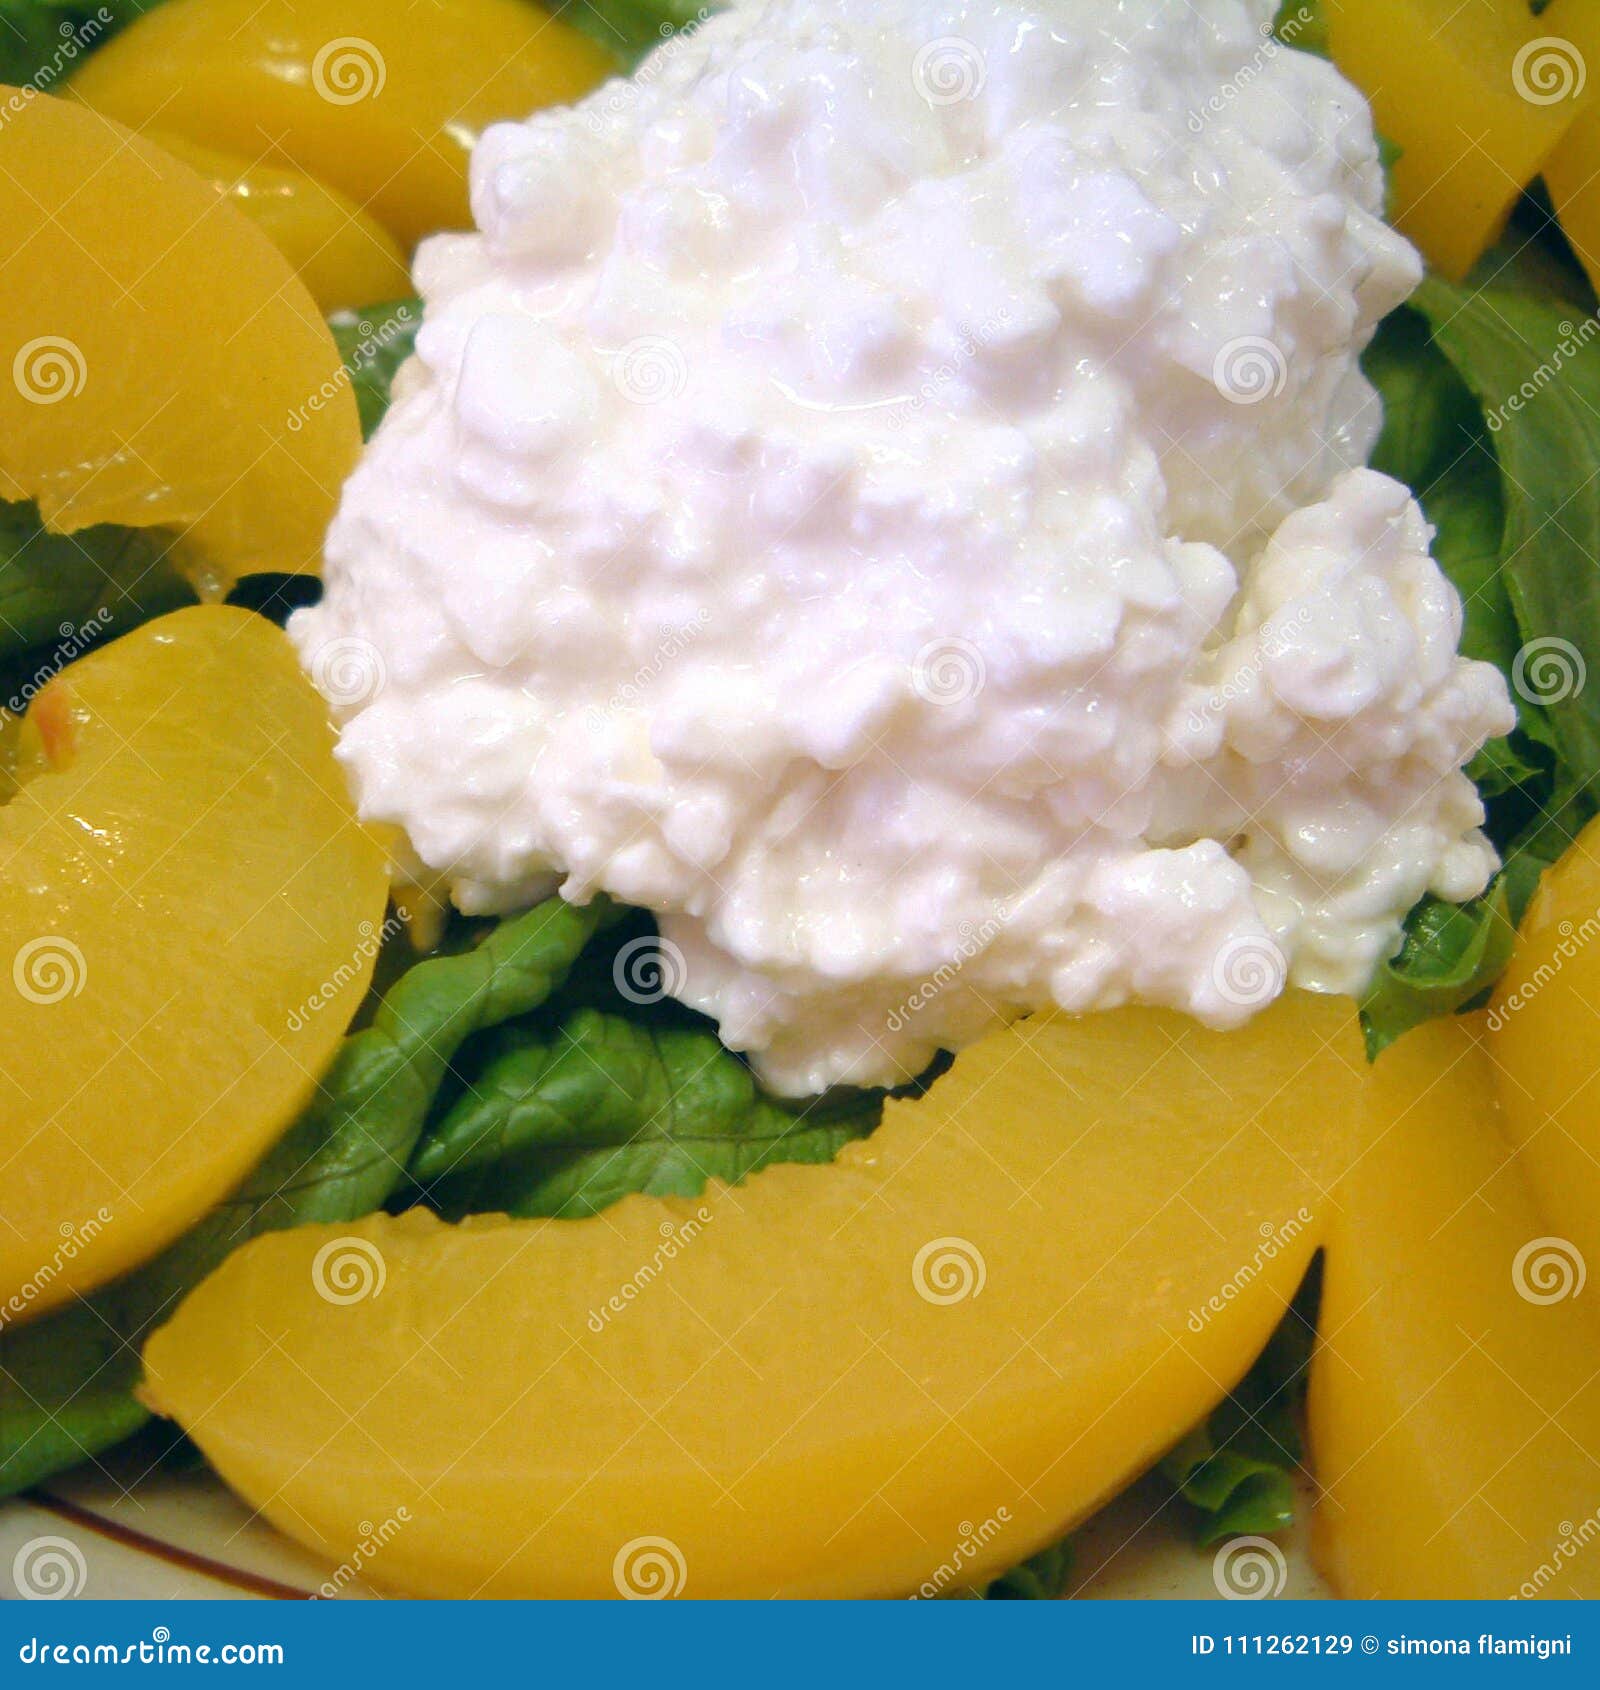 Cottage Cheese And Peaches Stock Image Image Of Peaches 111262129